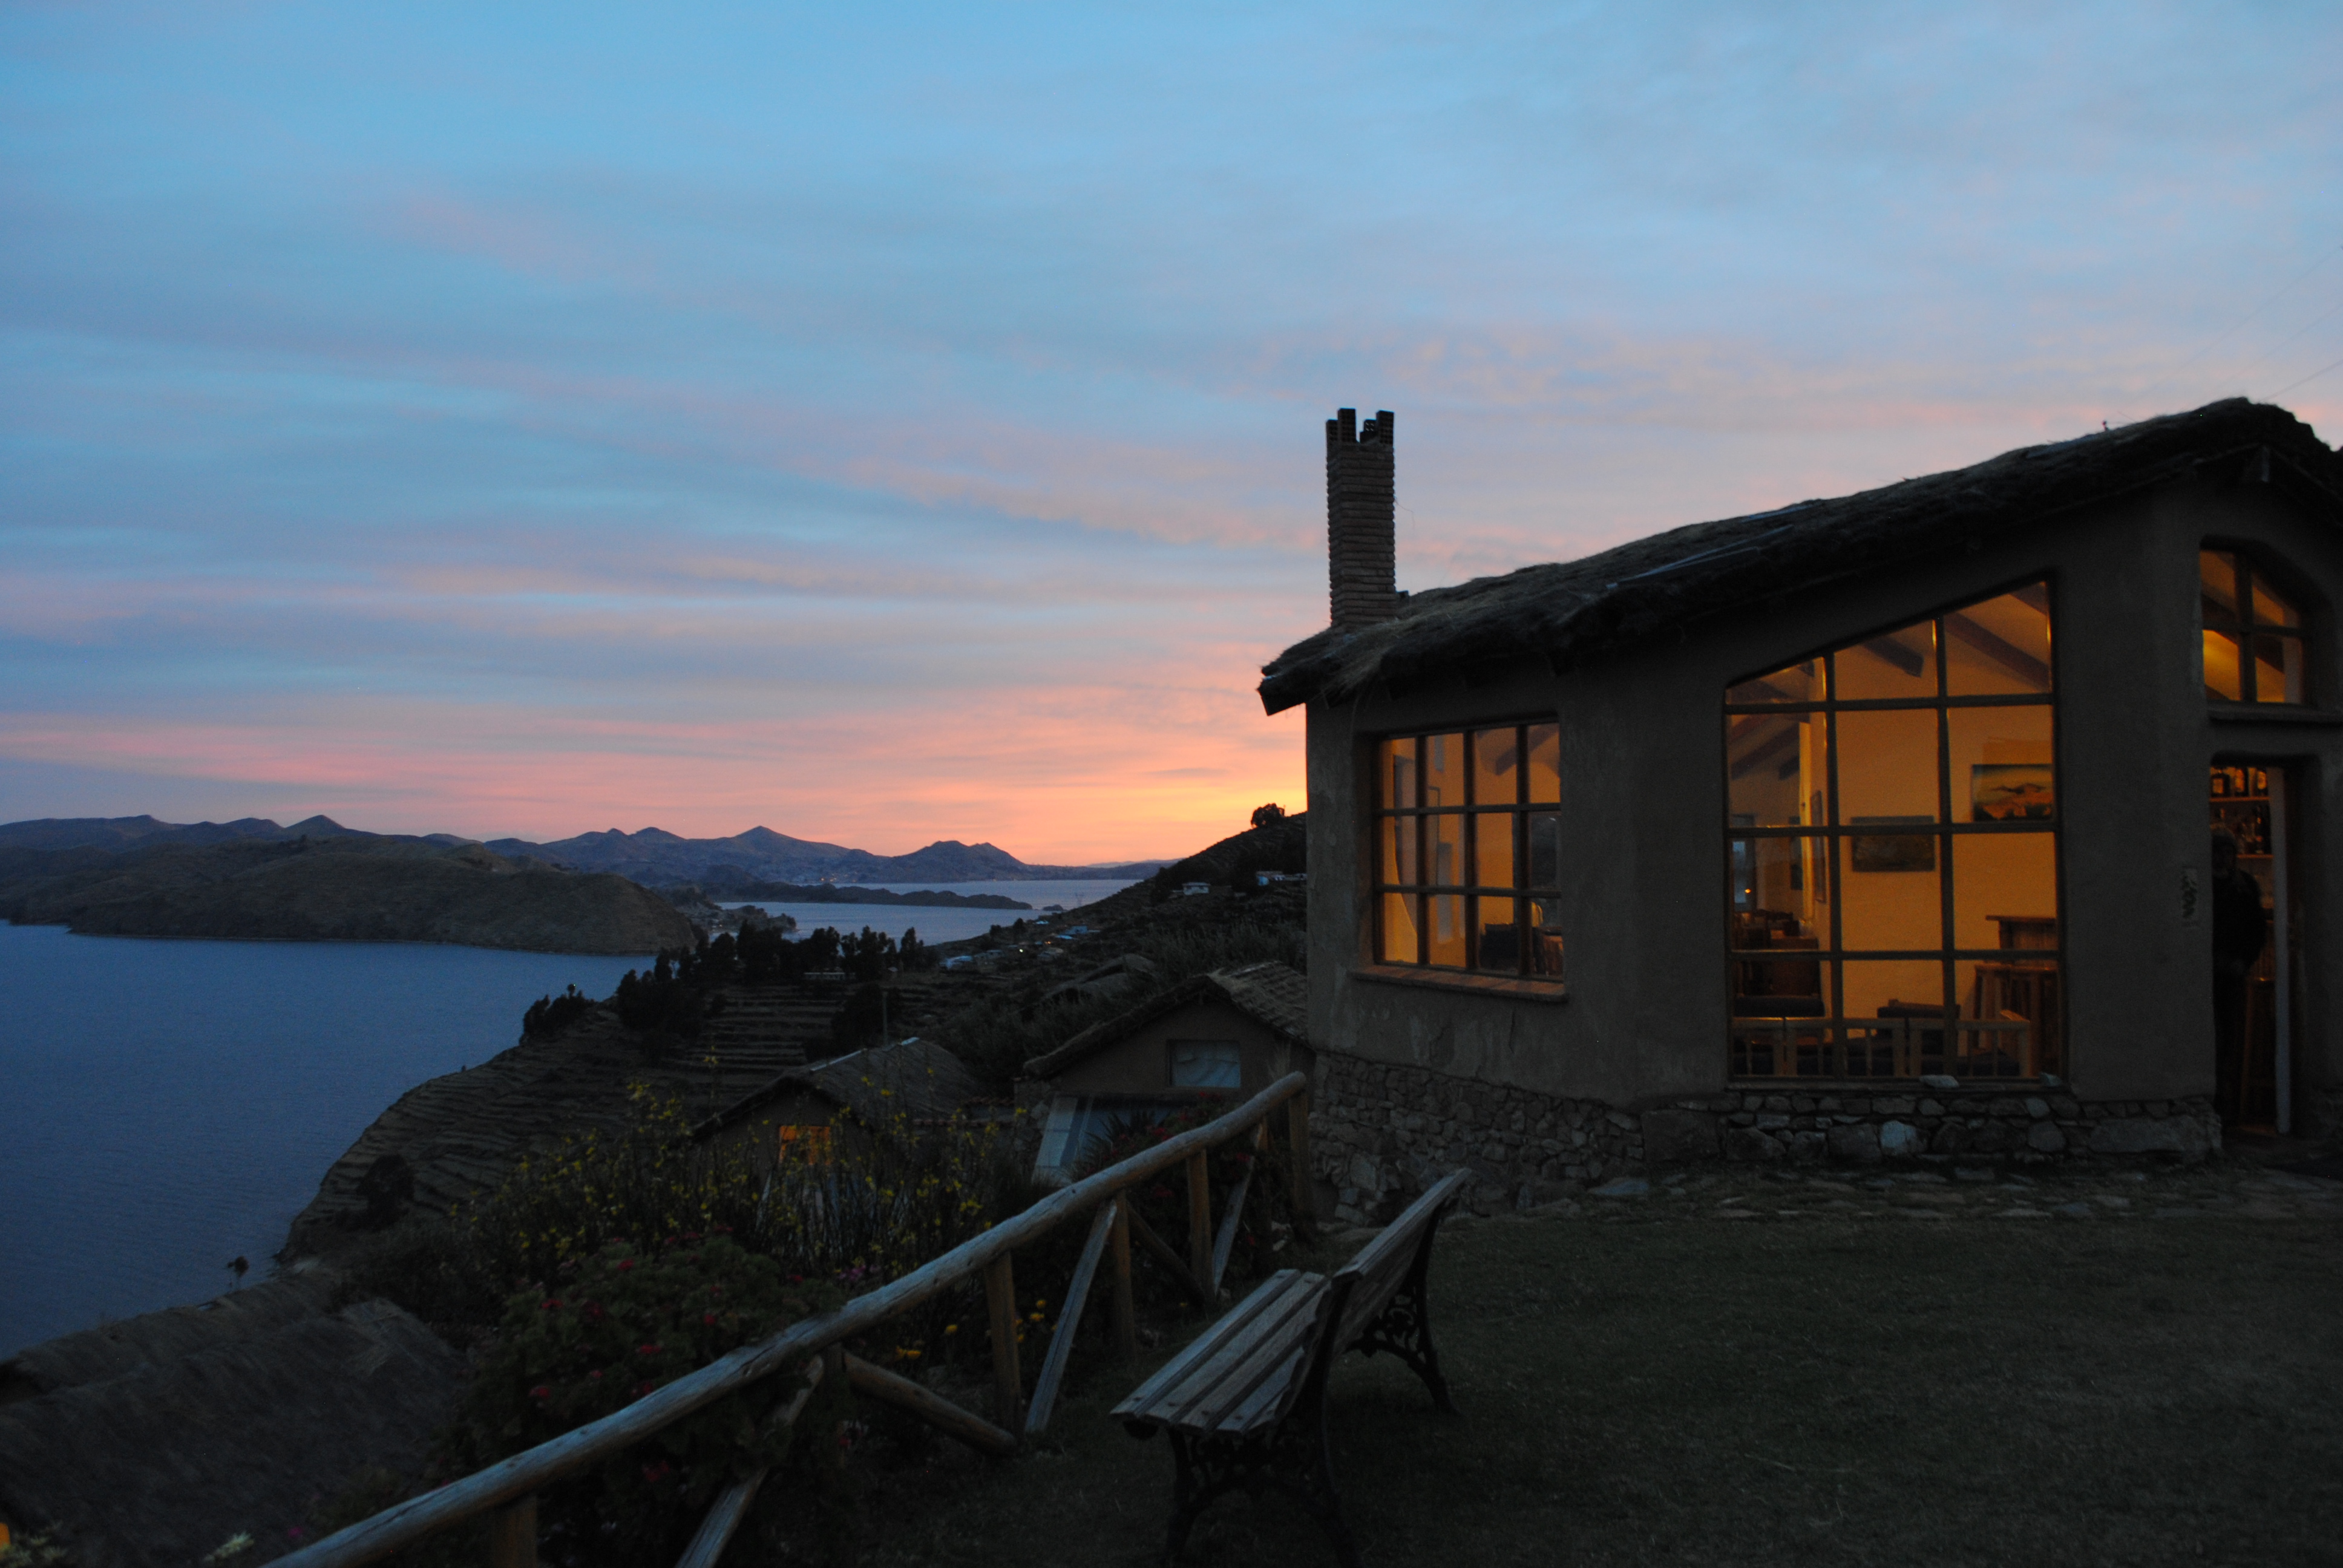 wp-content/uploads/itineraries/Bolivia/Cradle of the Inca Empire/ecolodge at sunset.JPG